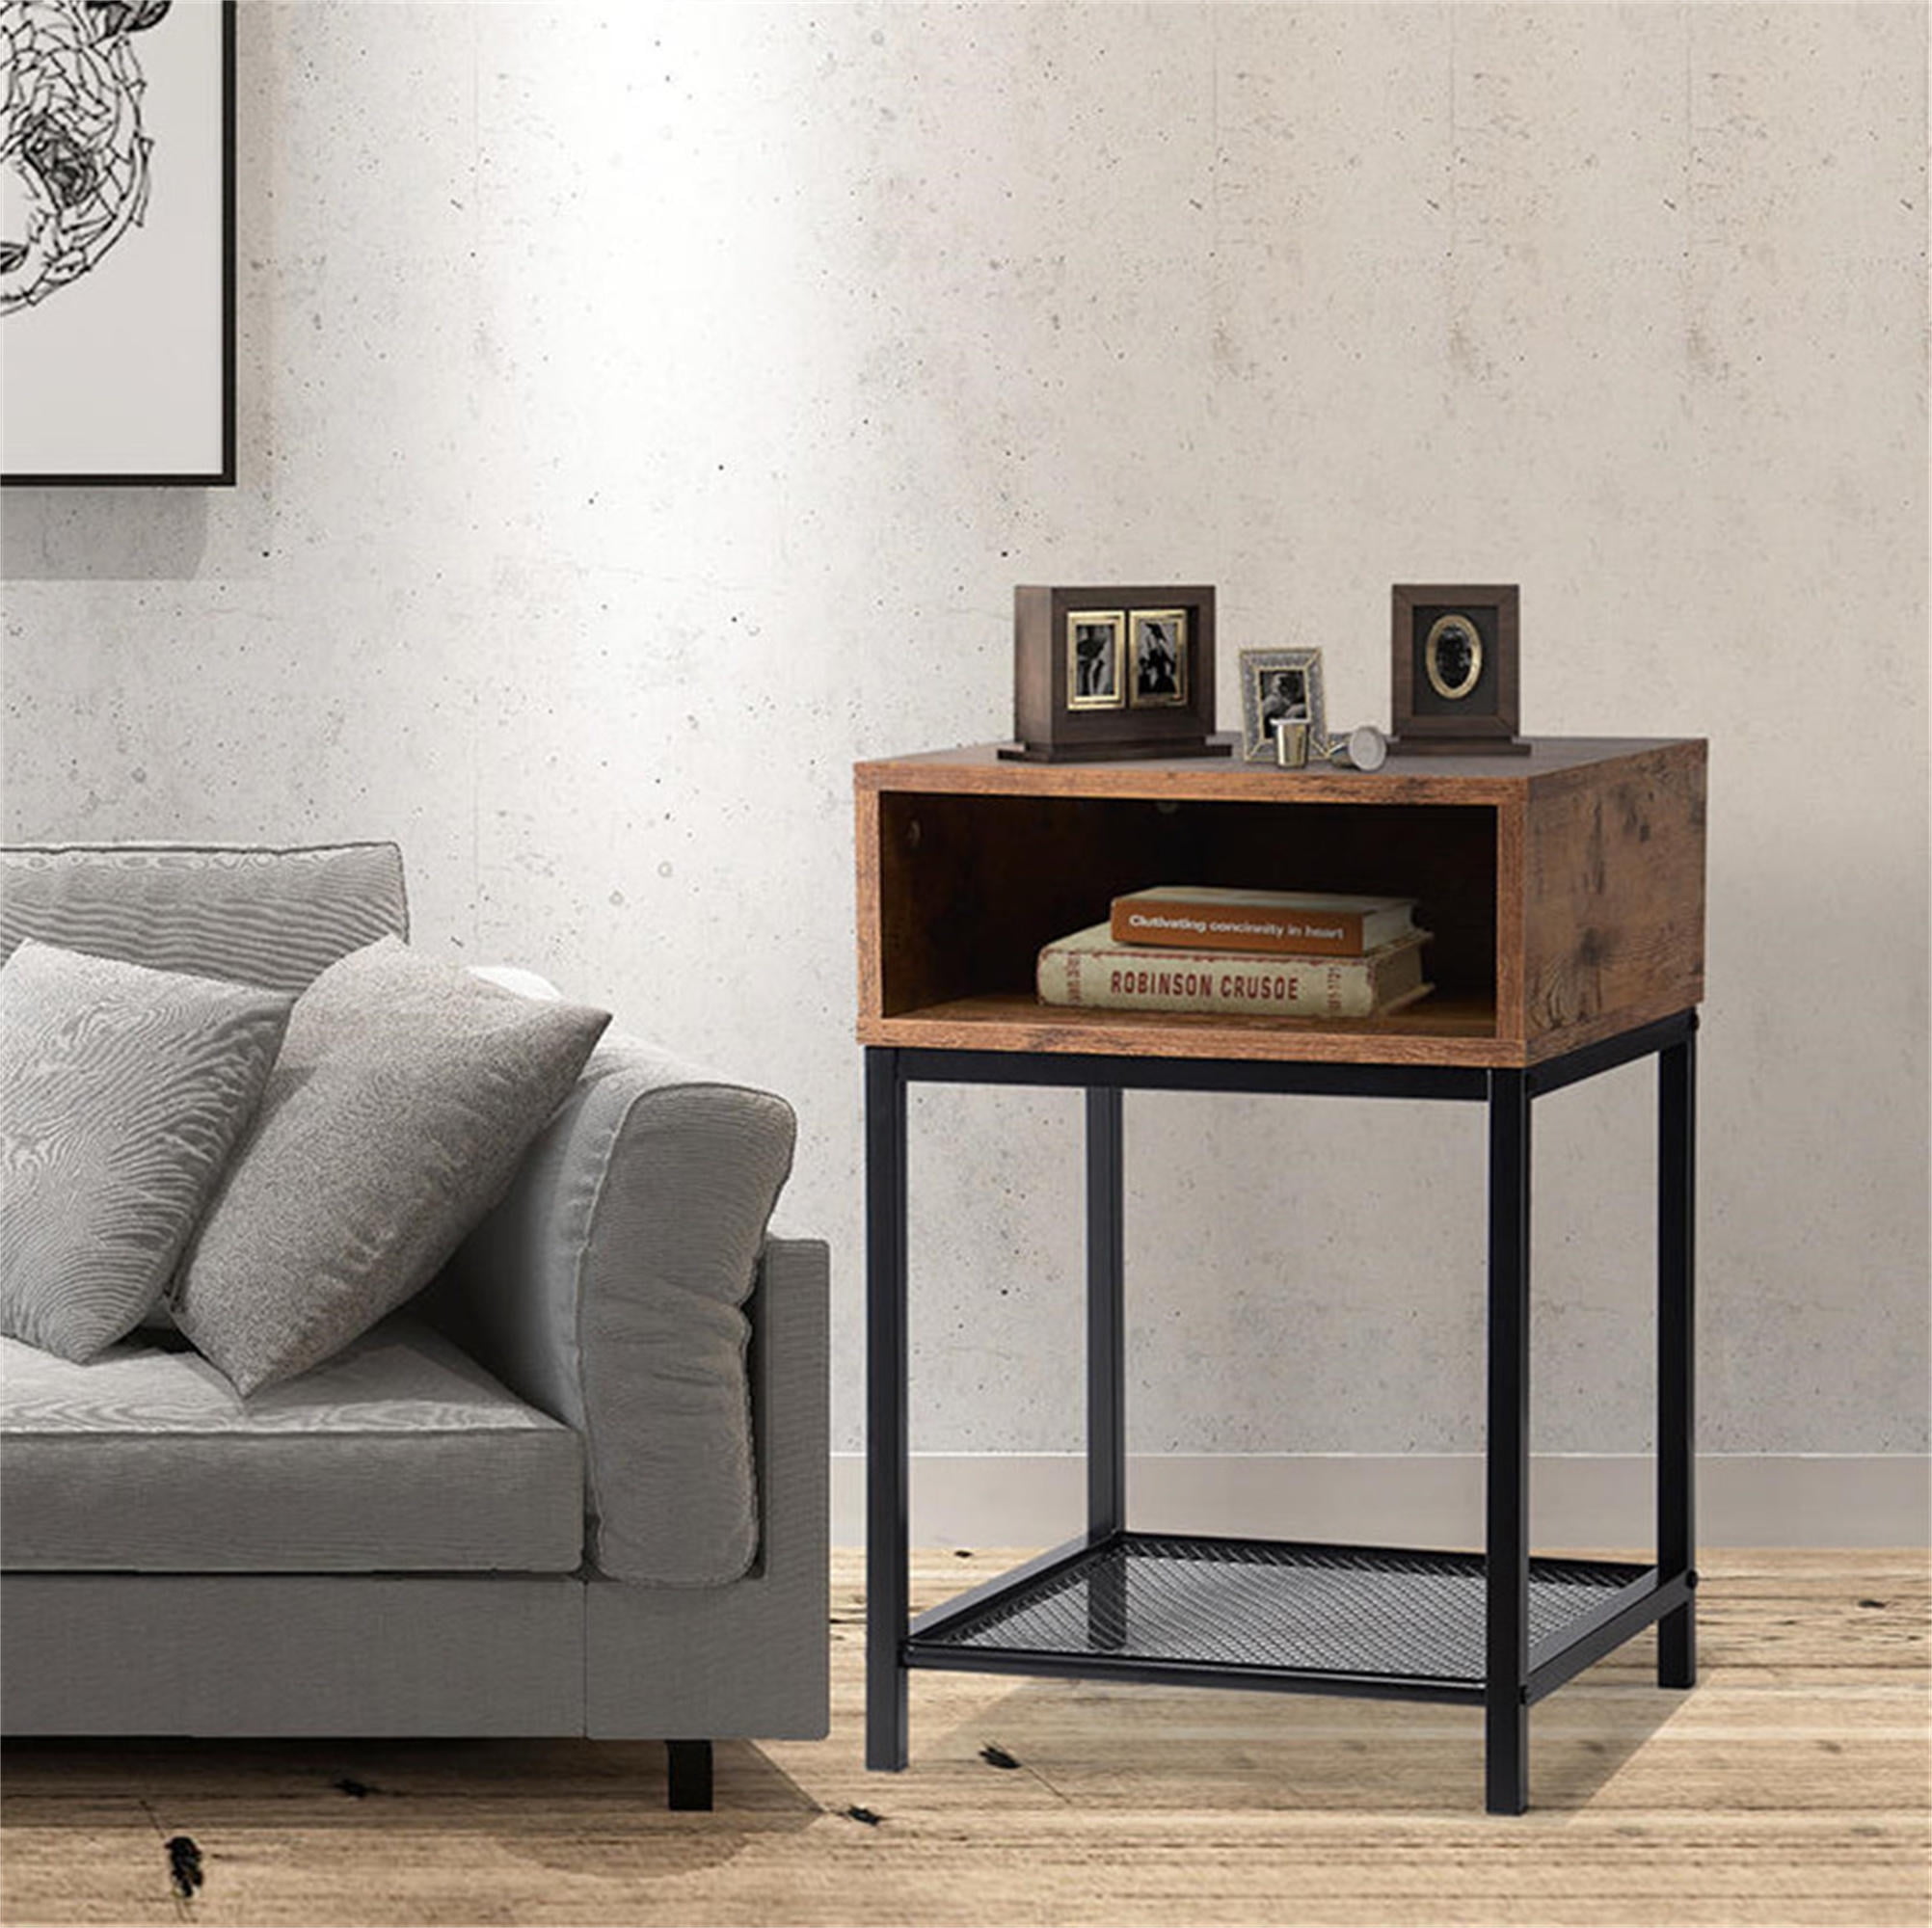 Mobile End Table Side Sofa Table Nightstand Shelf Accent Drawer Table Industrial 